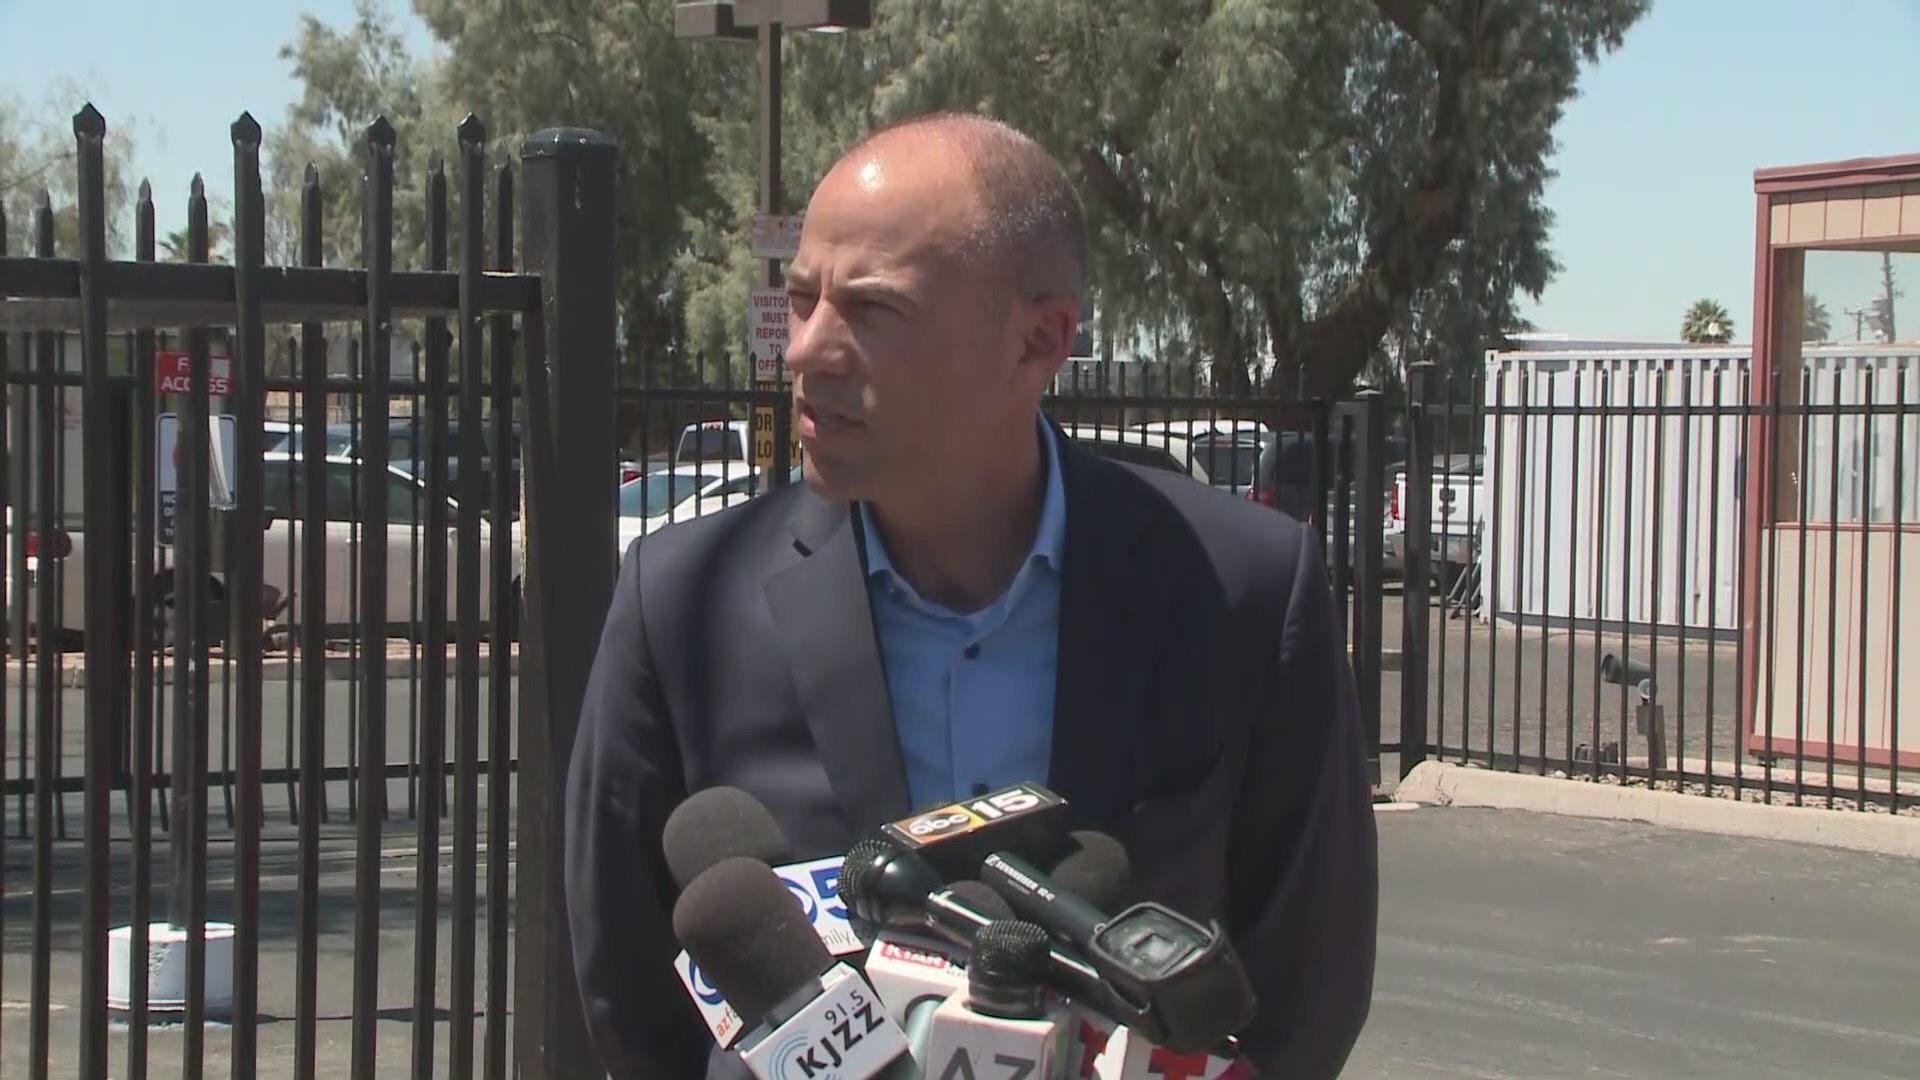 Stormy Daniel's lawyer, Michael Avenatti, is representing five immigrant children separated from their parents and being held in Phoenix. See what he had to say at a press conference about the issue.